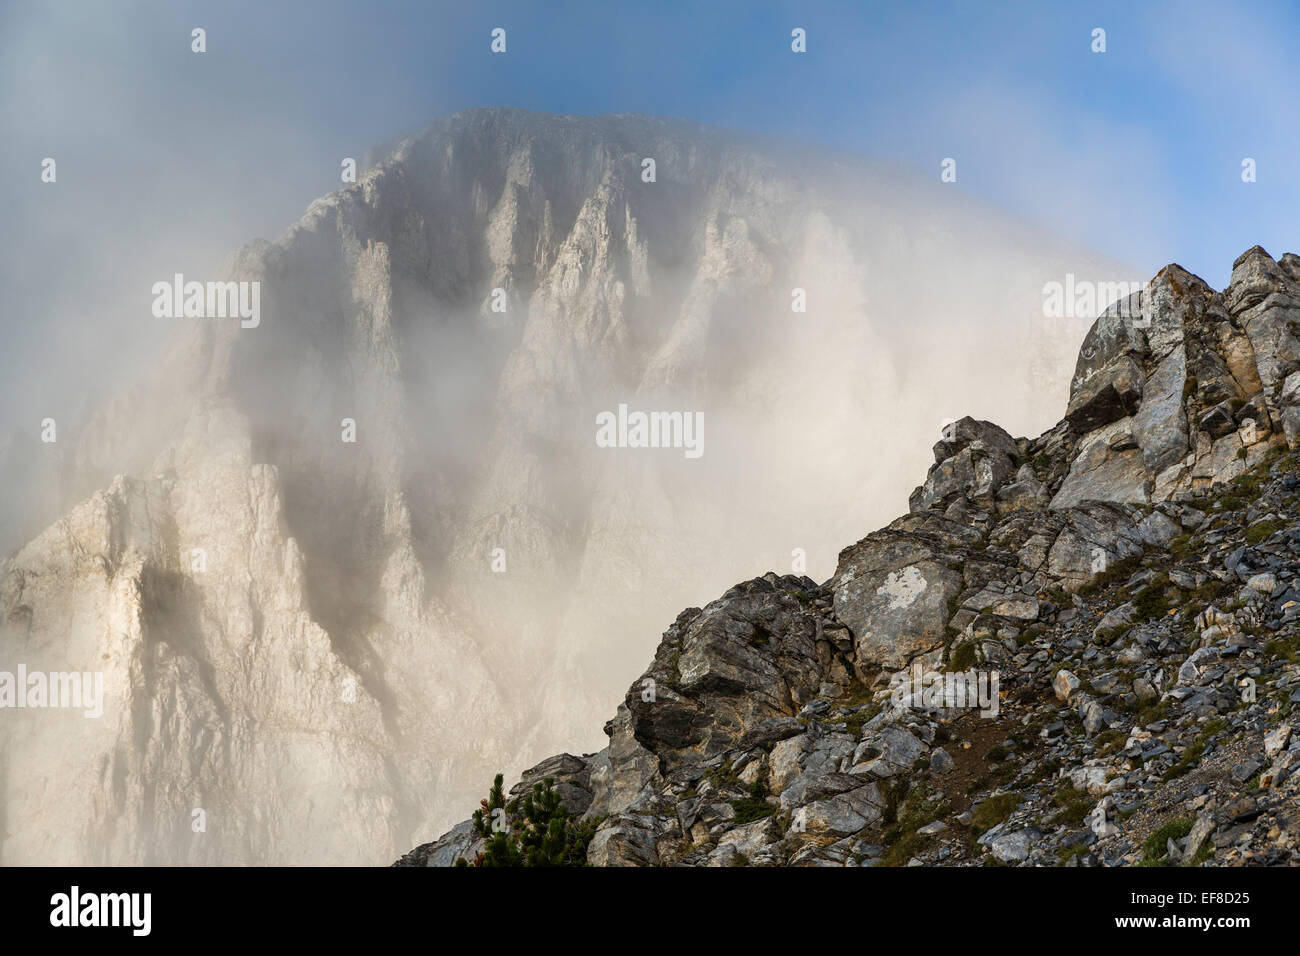 Summit of Mount Olympus in clouds, Mt Olympus National Park, Greece Stock Photo